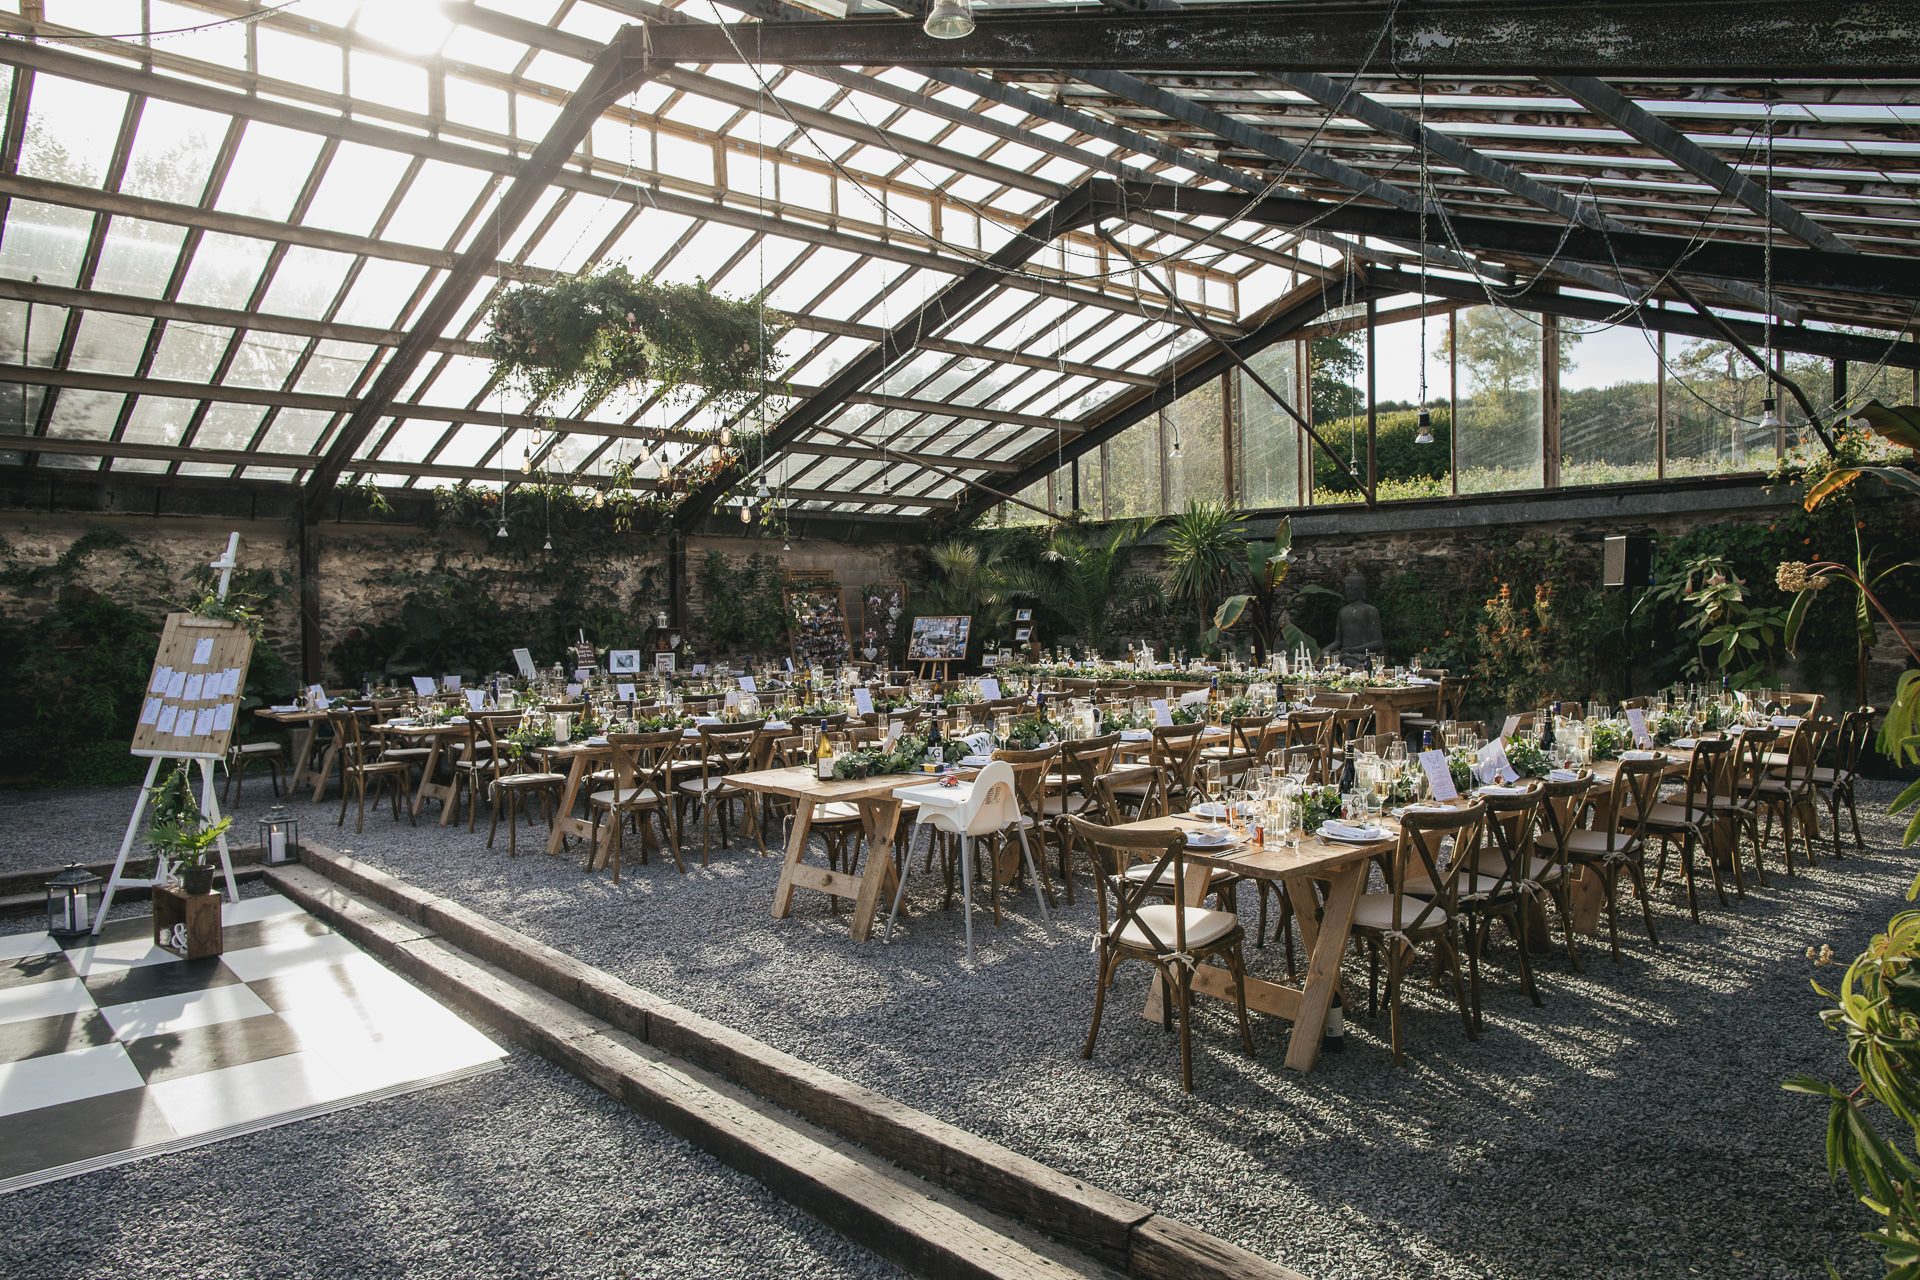 Stunning glasshouse with long tables laid and decorated for wedding